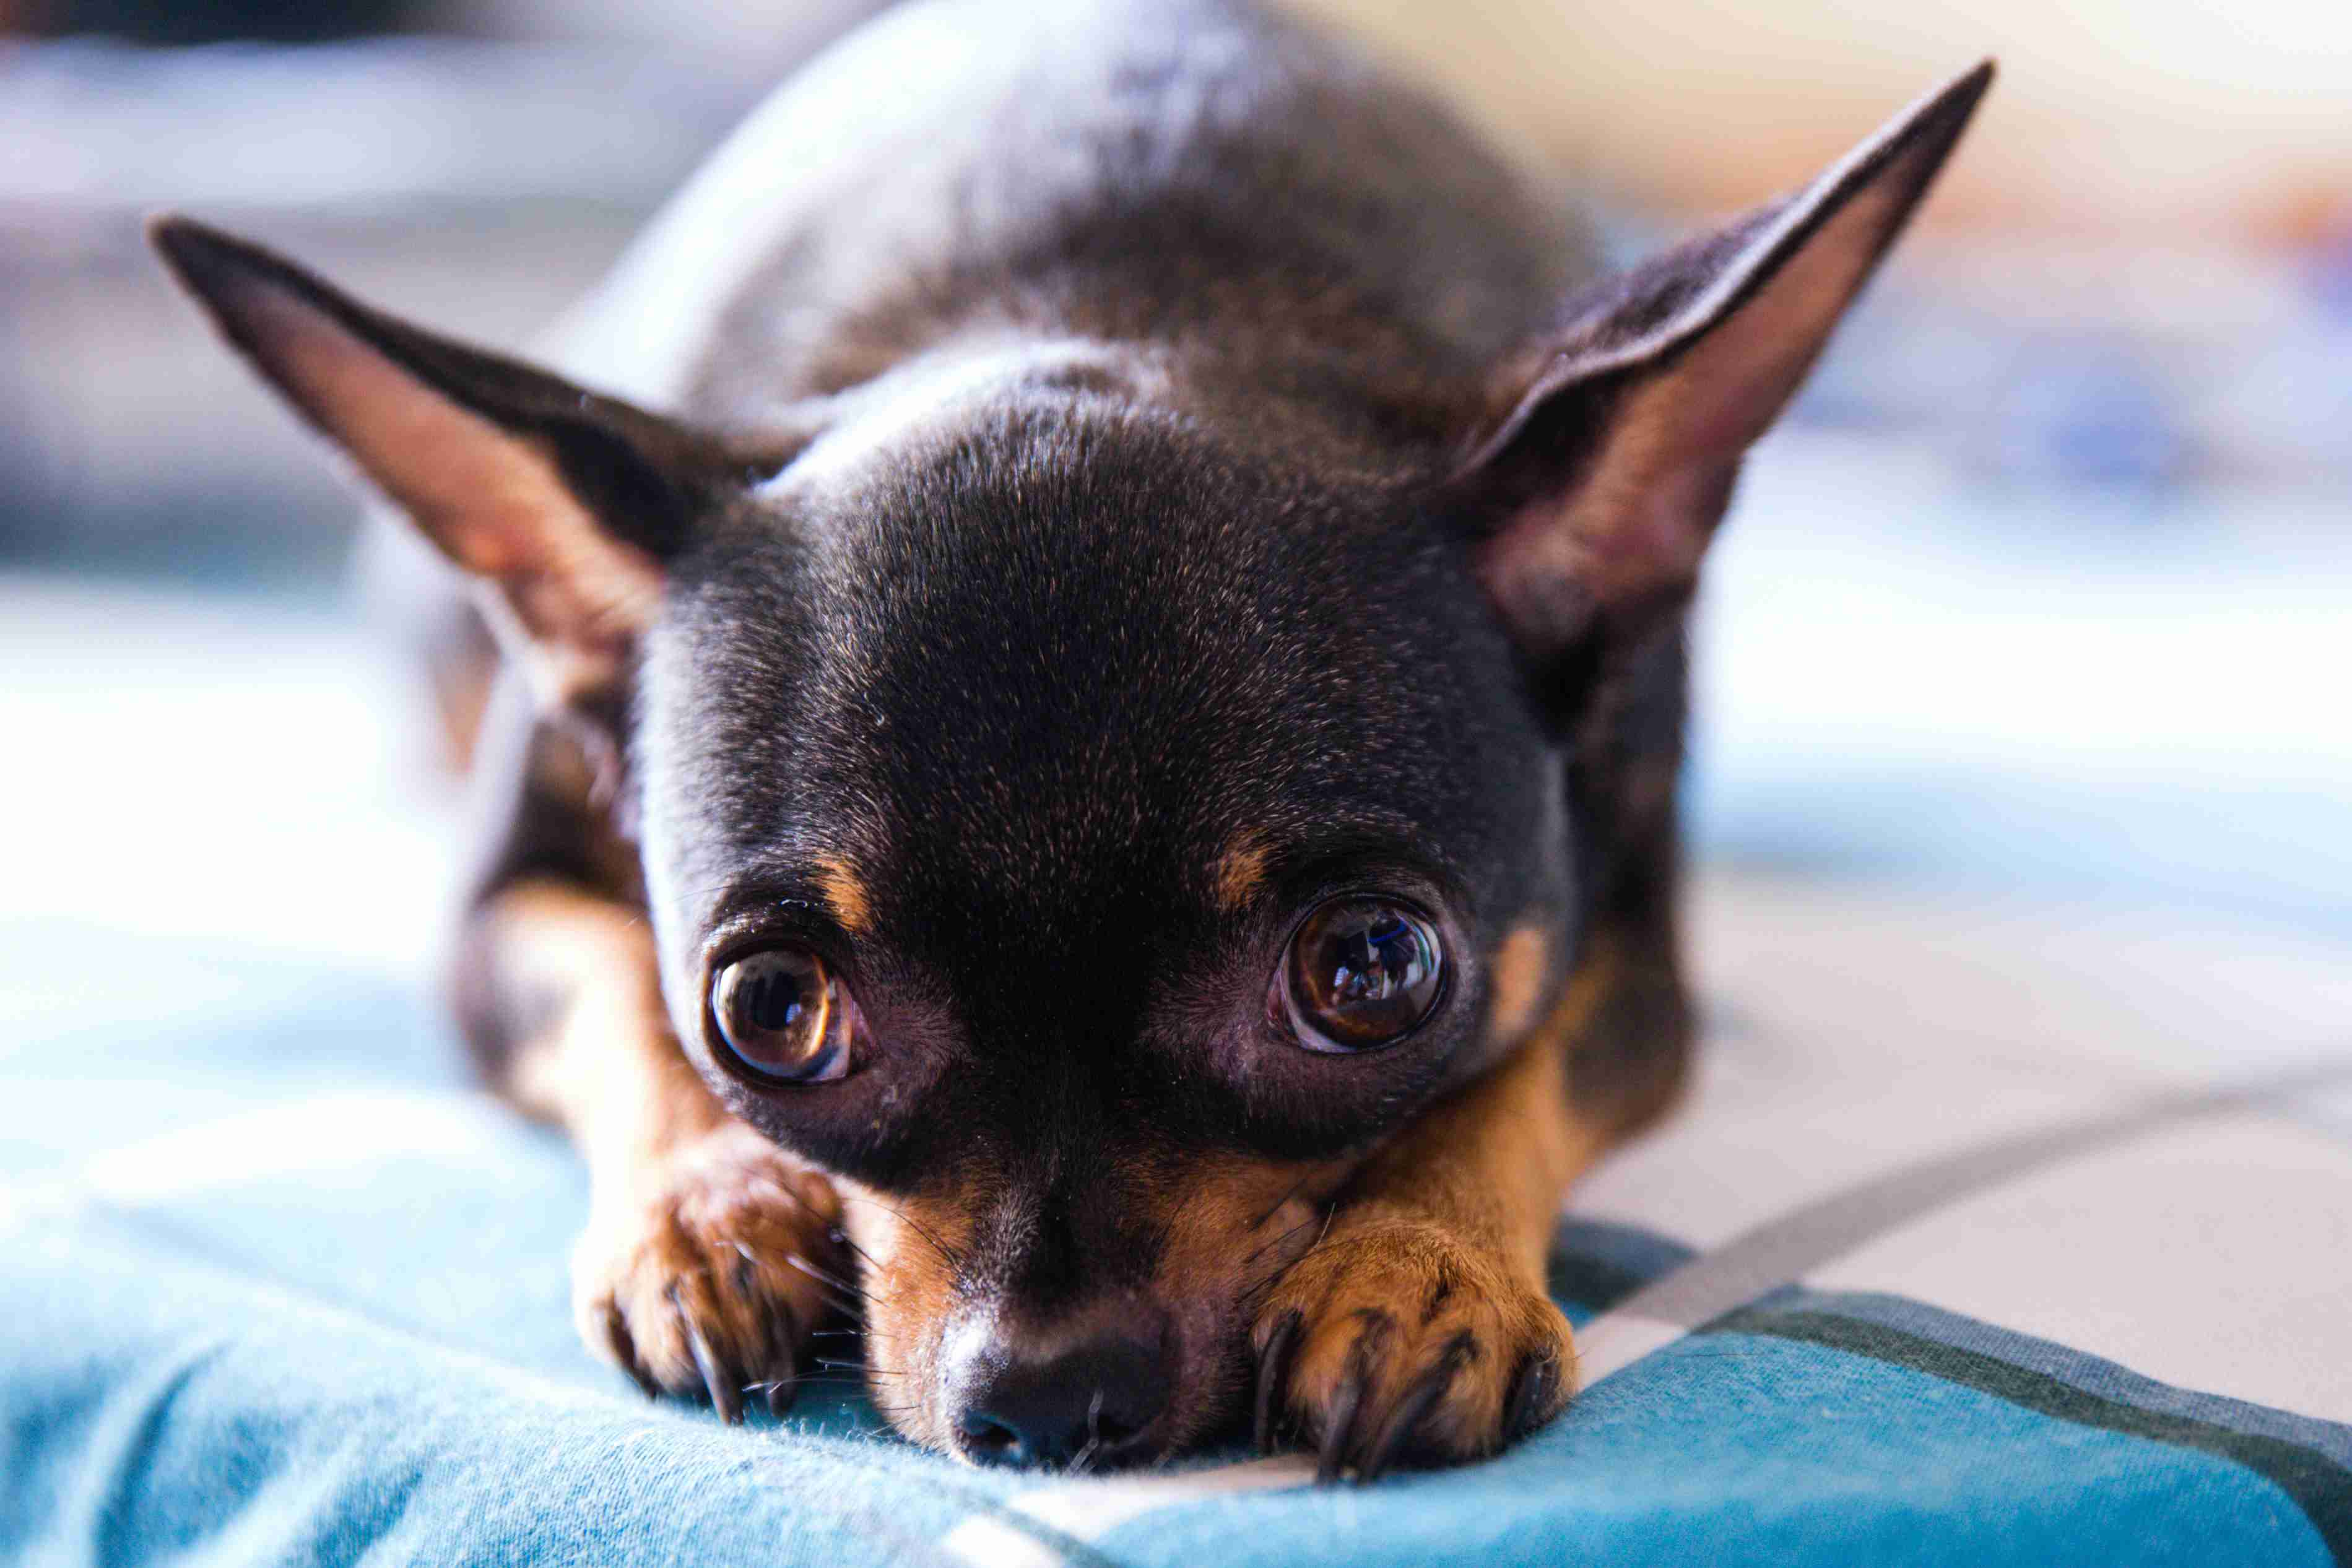 Are there any specific calming techniques or exercises that can help soothe a Chihuahua's anger?